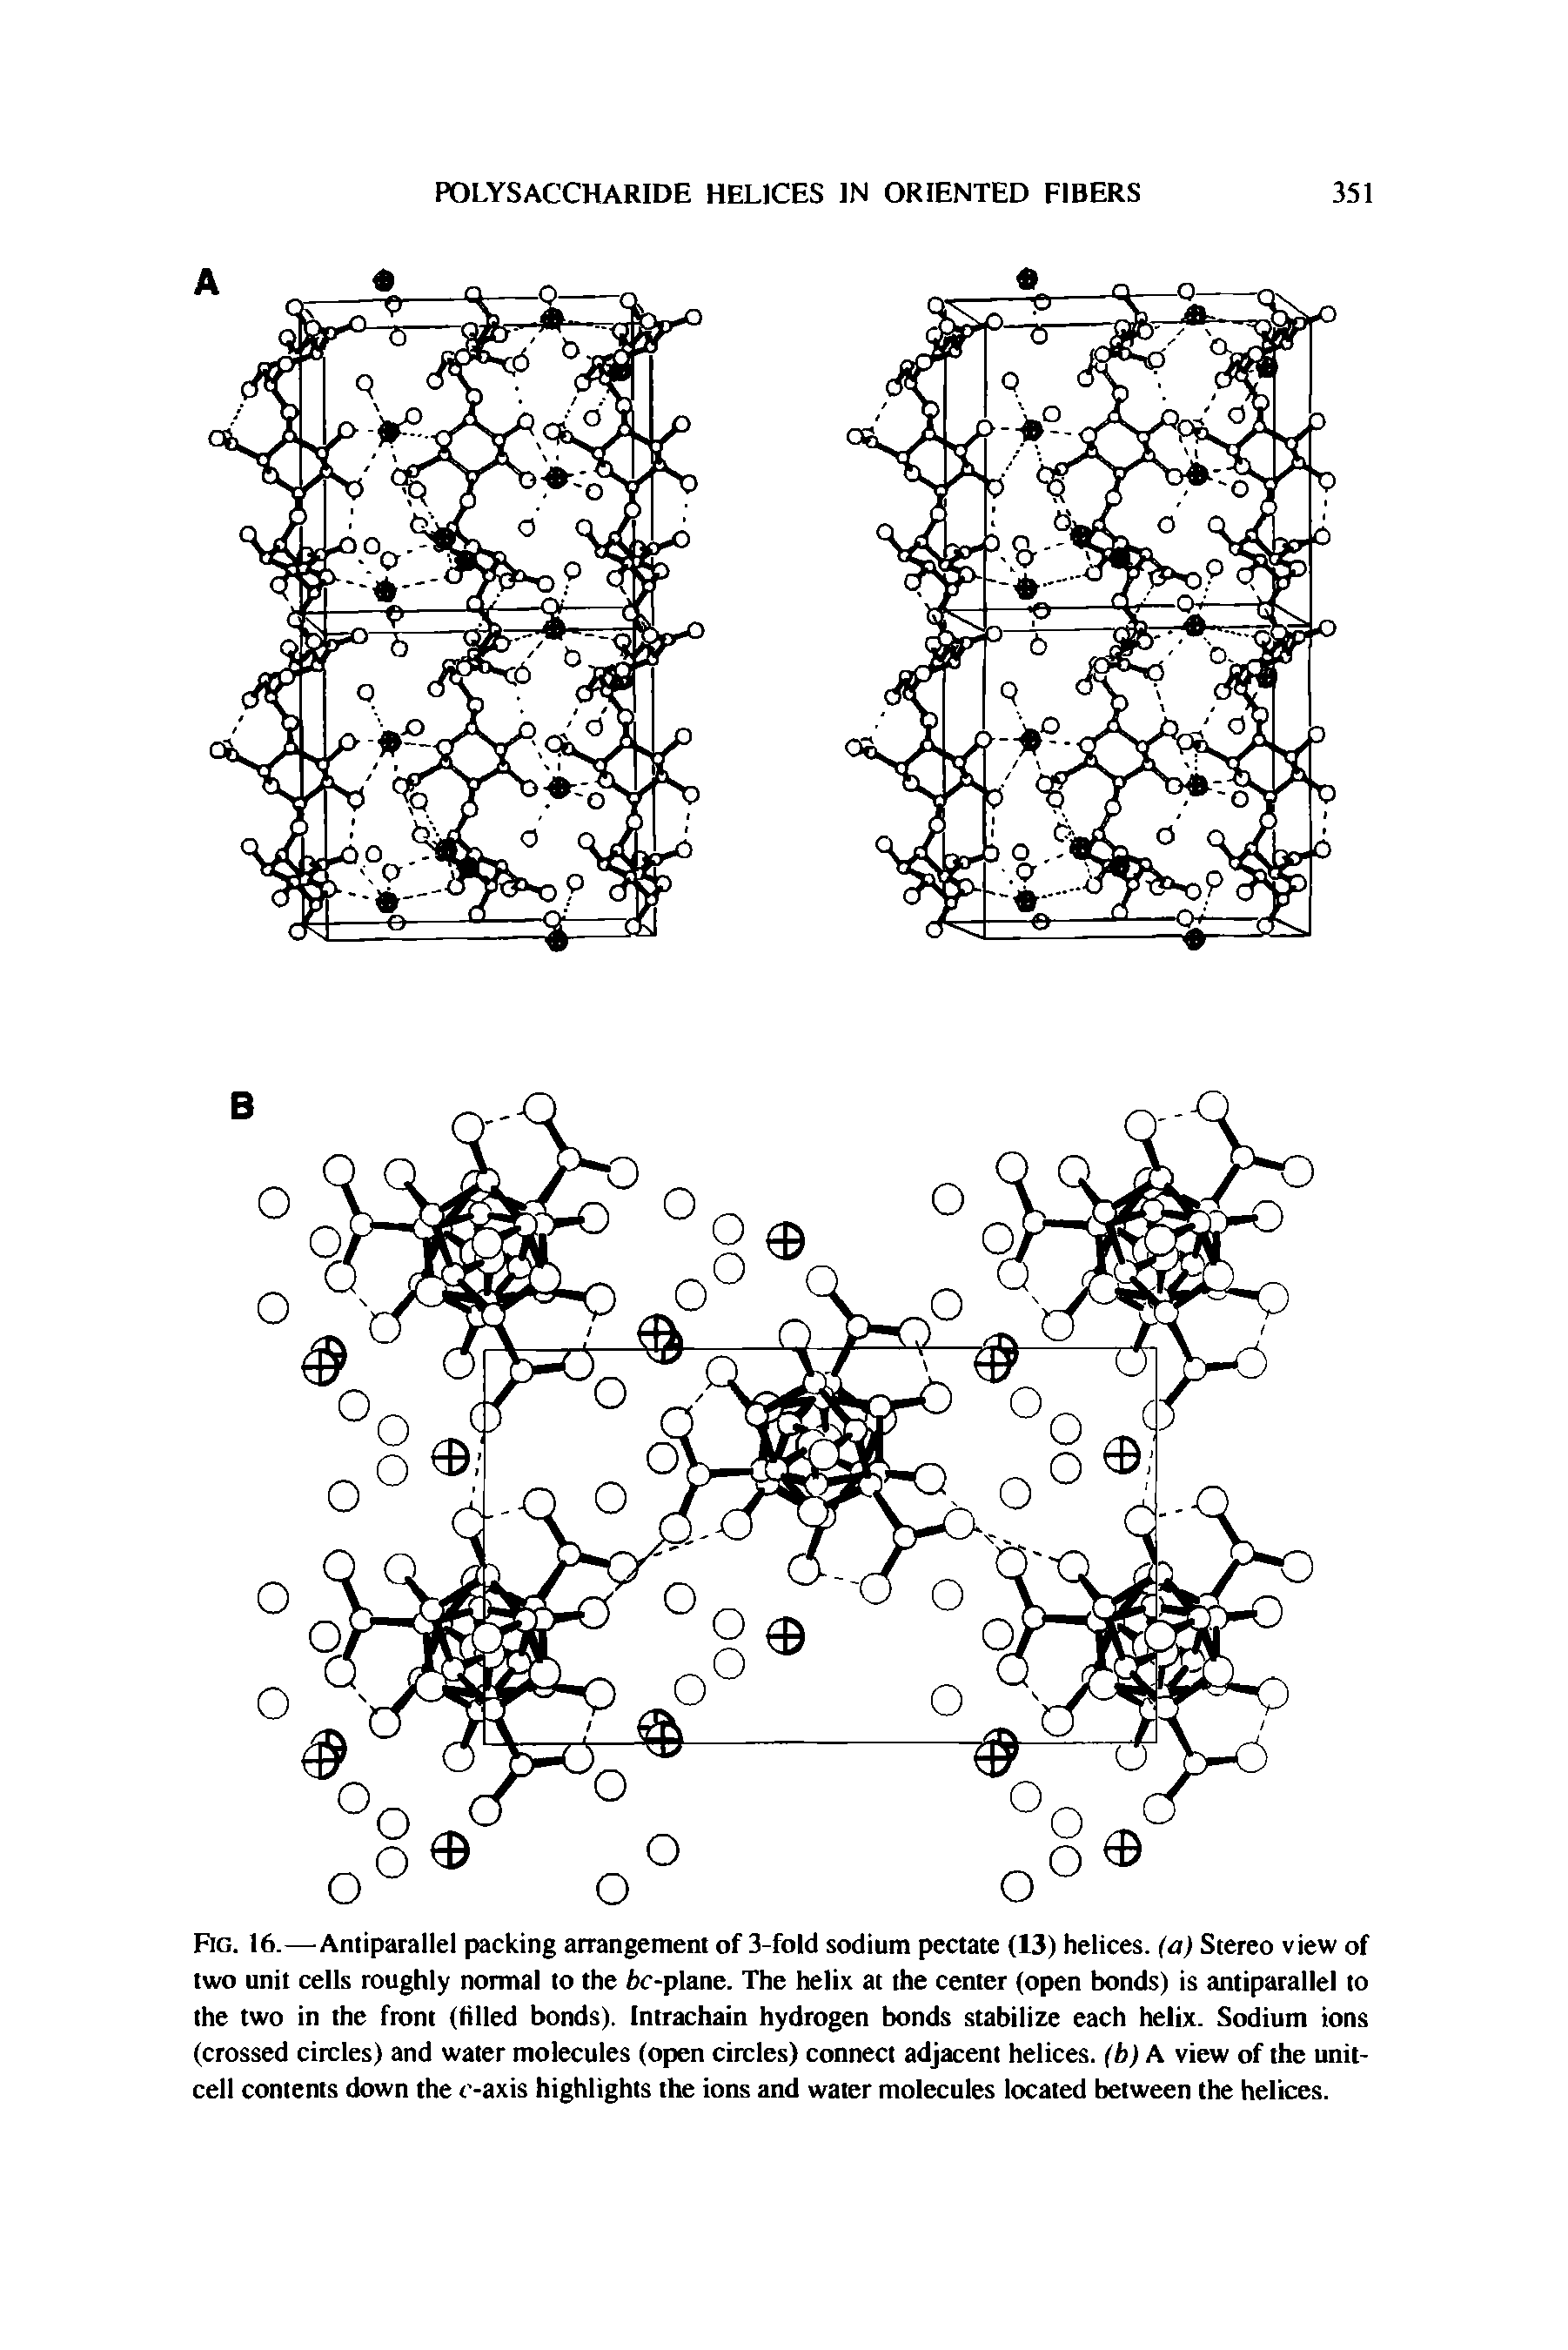 Fig. 16.—Antiparallel packing arrangement of 3-fold sodium pectate (13) helices, (a) Stereo view of two unit cells roughly normal to the fcc-plane. The helix at the center (open bonds) is antiparallel to the two in the front (tilled bonds). Intrachain hydrogen bonds stabilize each helix. Sodium ions (crossed circles) and water molecules (open circles) connect adjacent helices, (b) A view of the unitcell contents down the t -axis highlights the ions and water molecules located between the helices.